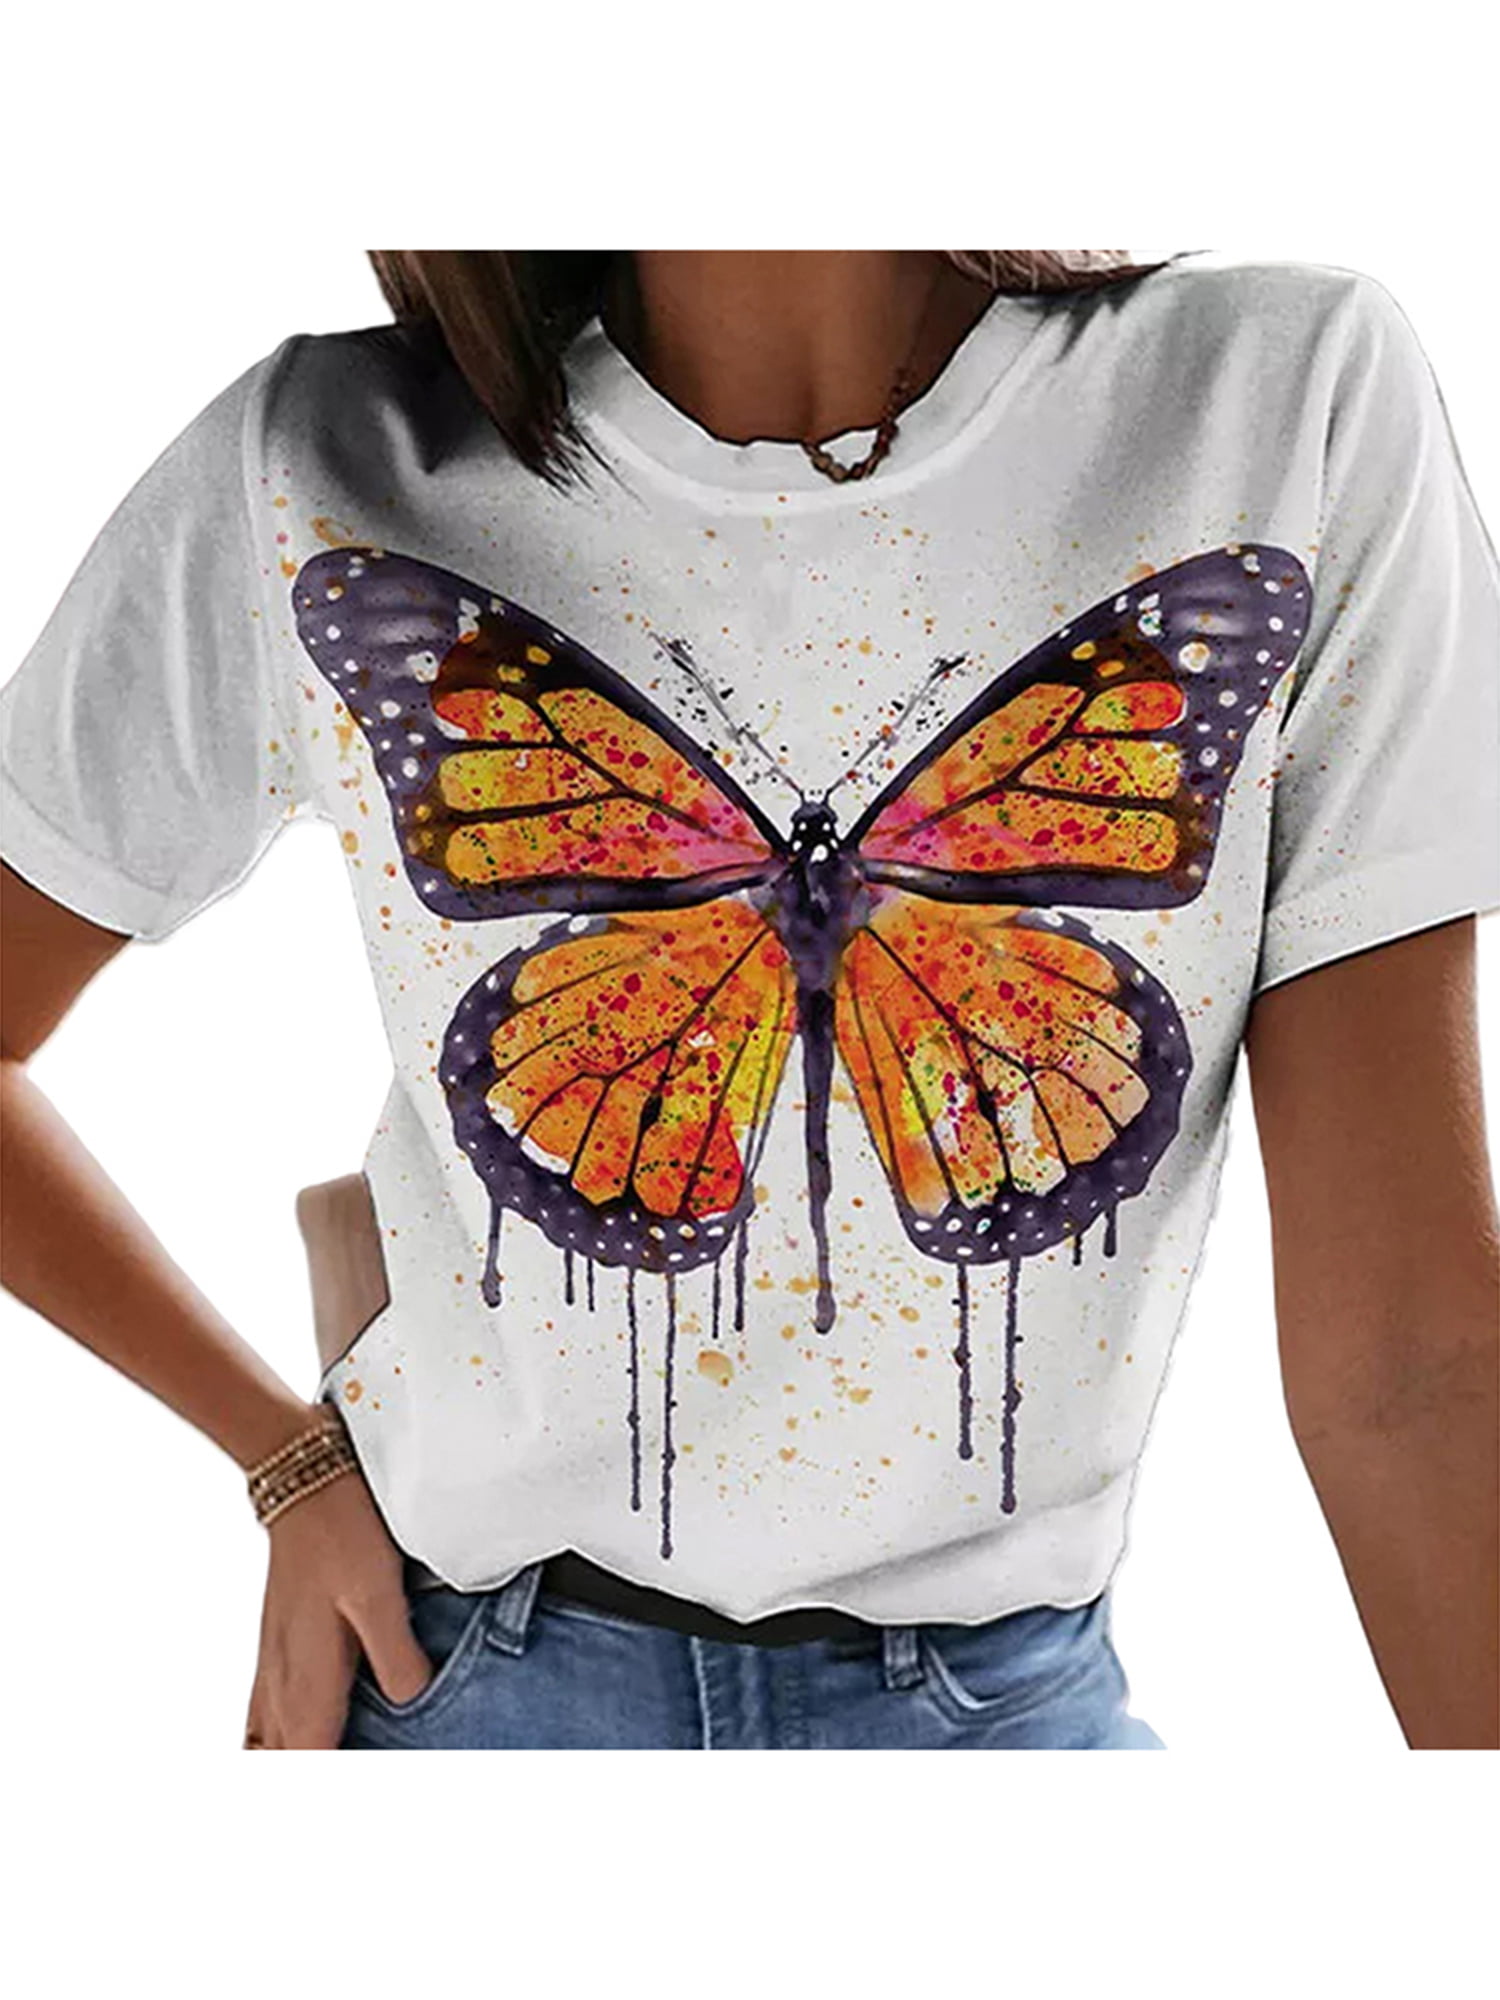 Women's Butterfly Floral Crew Neck Short Sleeve Top T-Shirt Loose Casual Blouse 